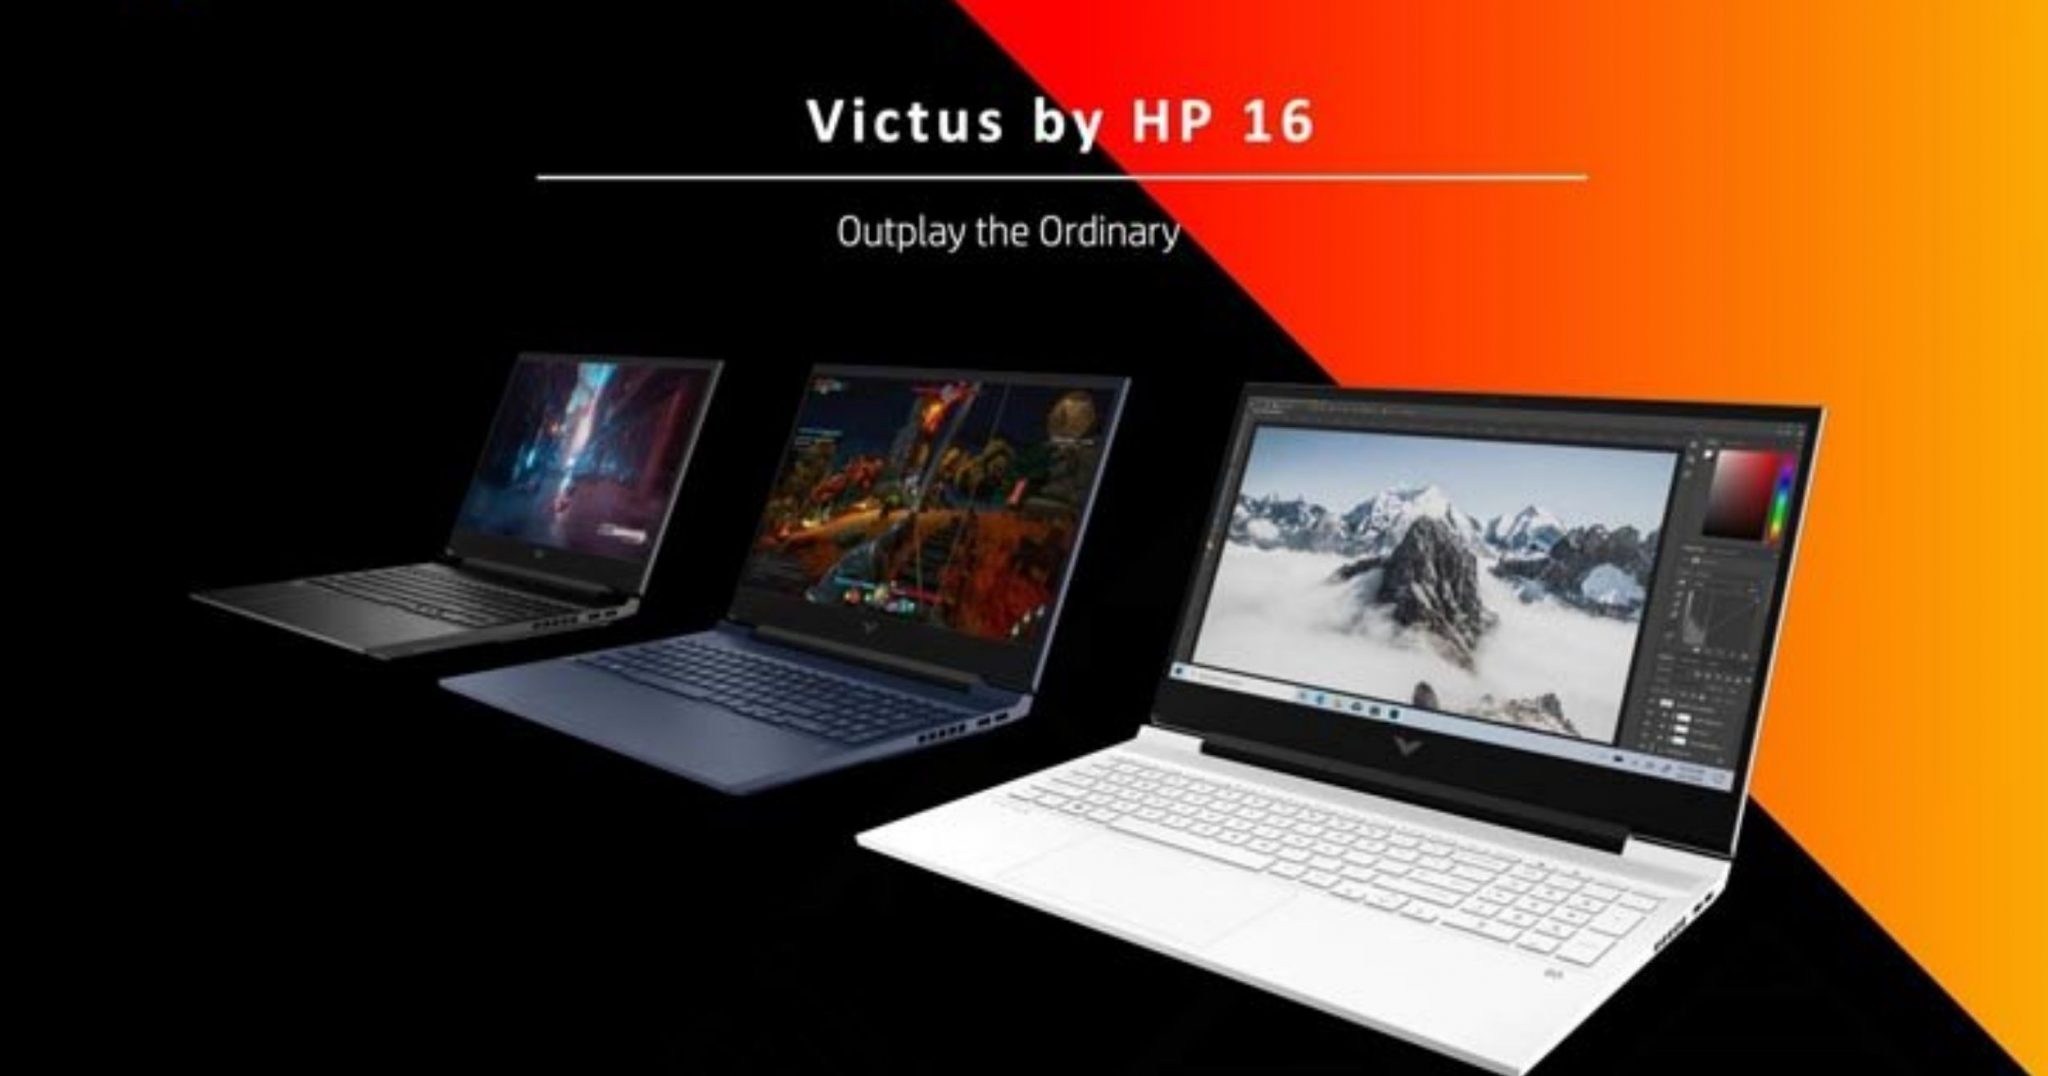 HP Launches New Victus 16 Gaming Laptop, New OMEN Laptops and Monitor Join!